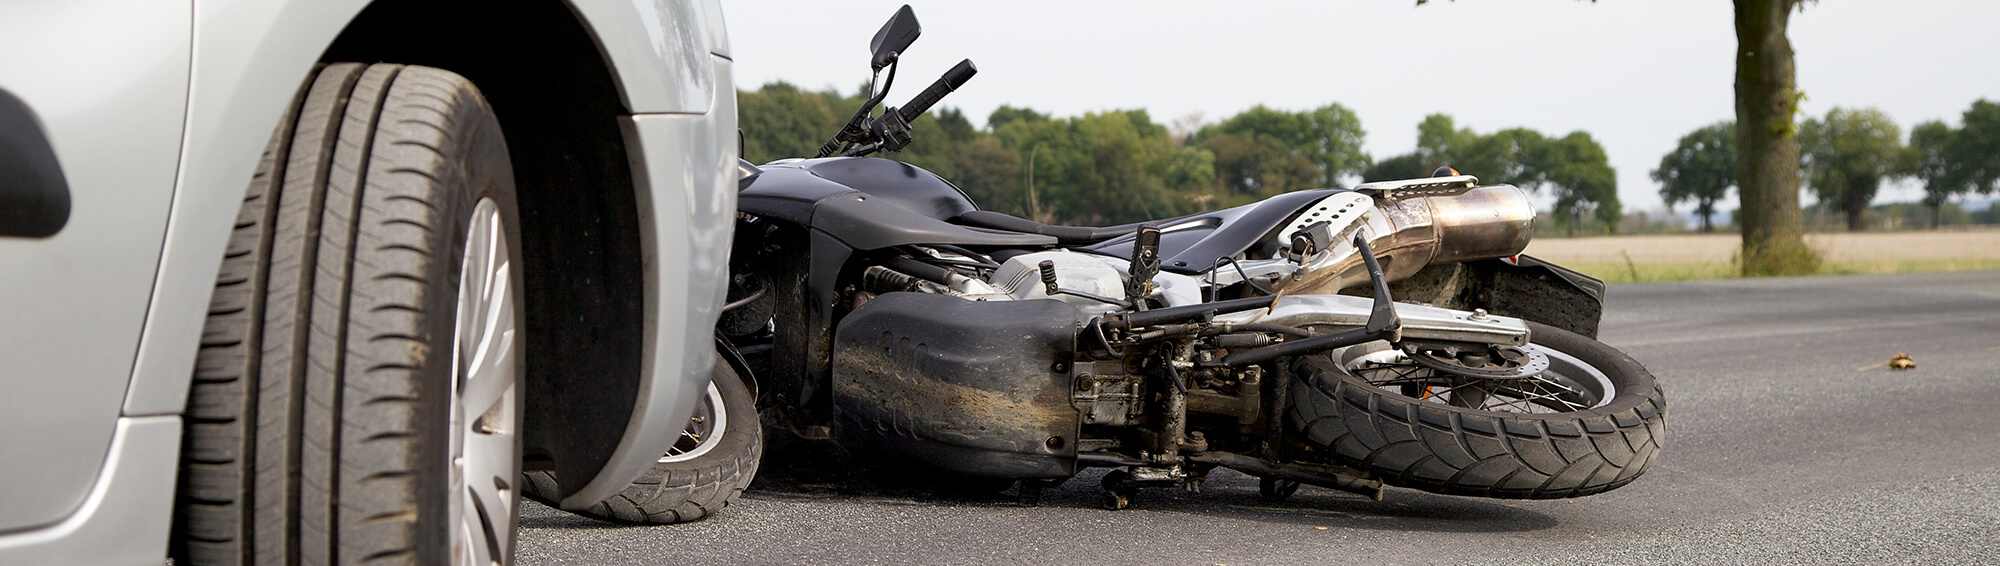 Nashville Motorcycle Accident Lawyers Discuss Motorcycle Safety Awareness Month